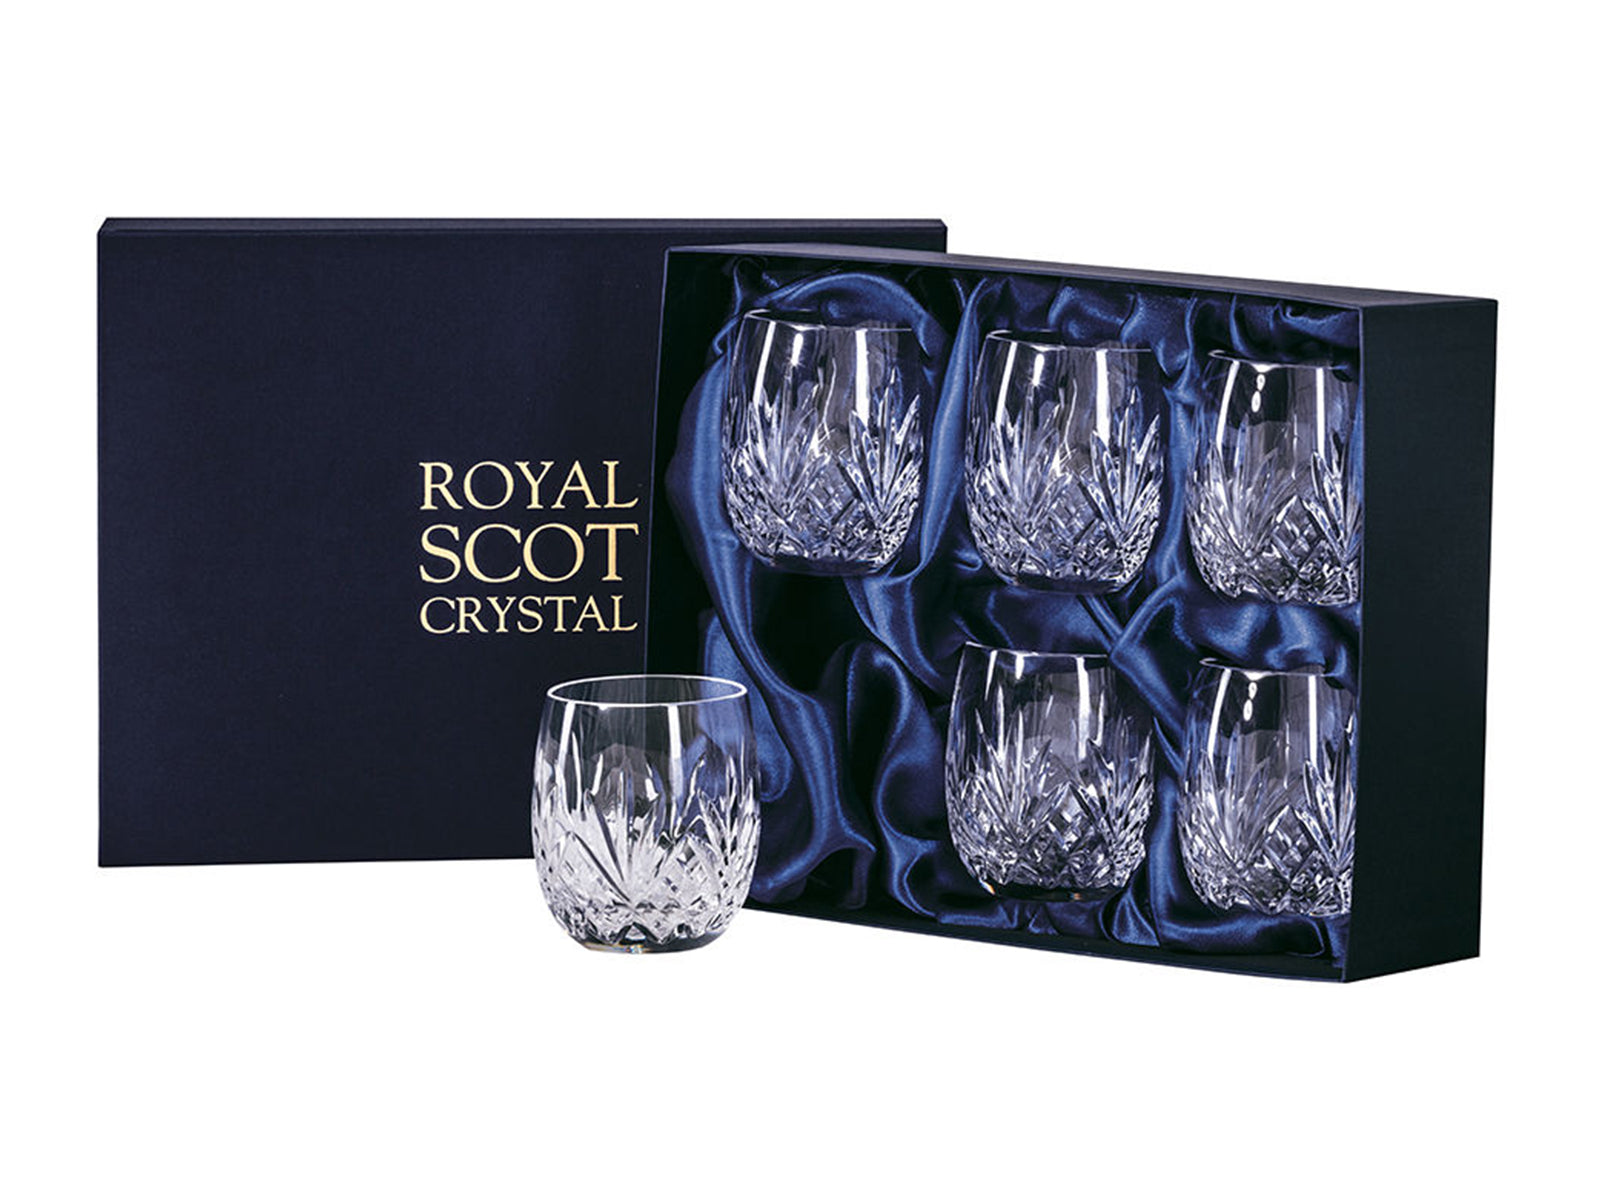 A set of six rounded gin and tonic tumblers with a bed of diamonds cut around the base, topped with deep five-pointed fans under a smooth rim. They come in a navy-blue silk-lined presentation box with gold branding on the lid.